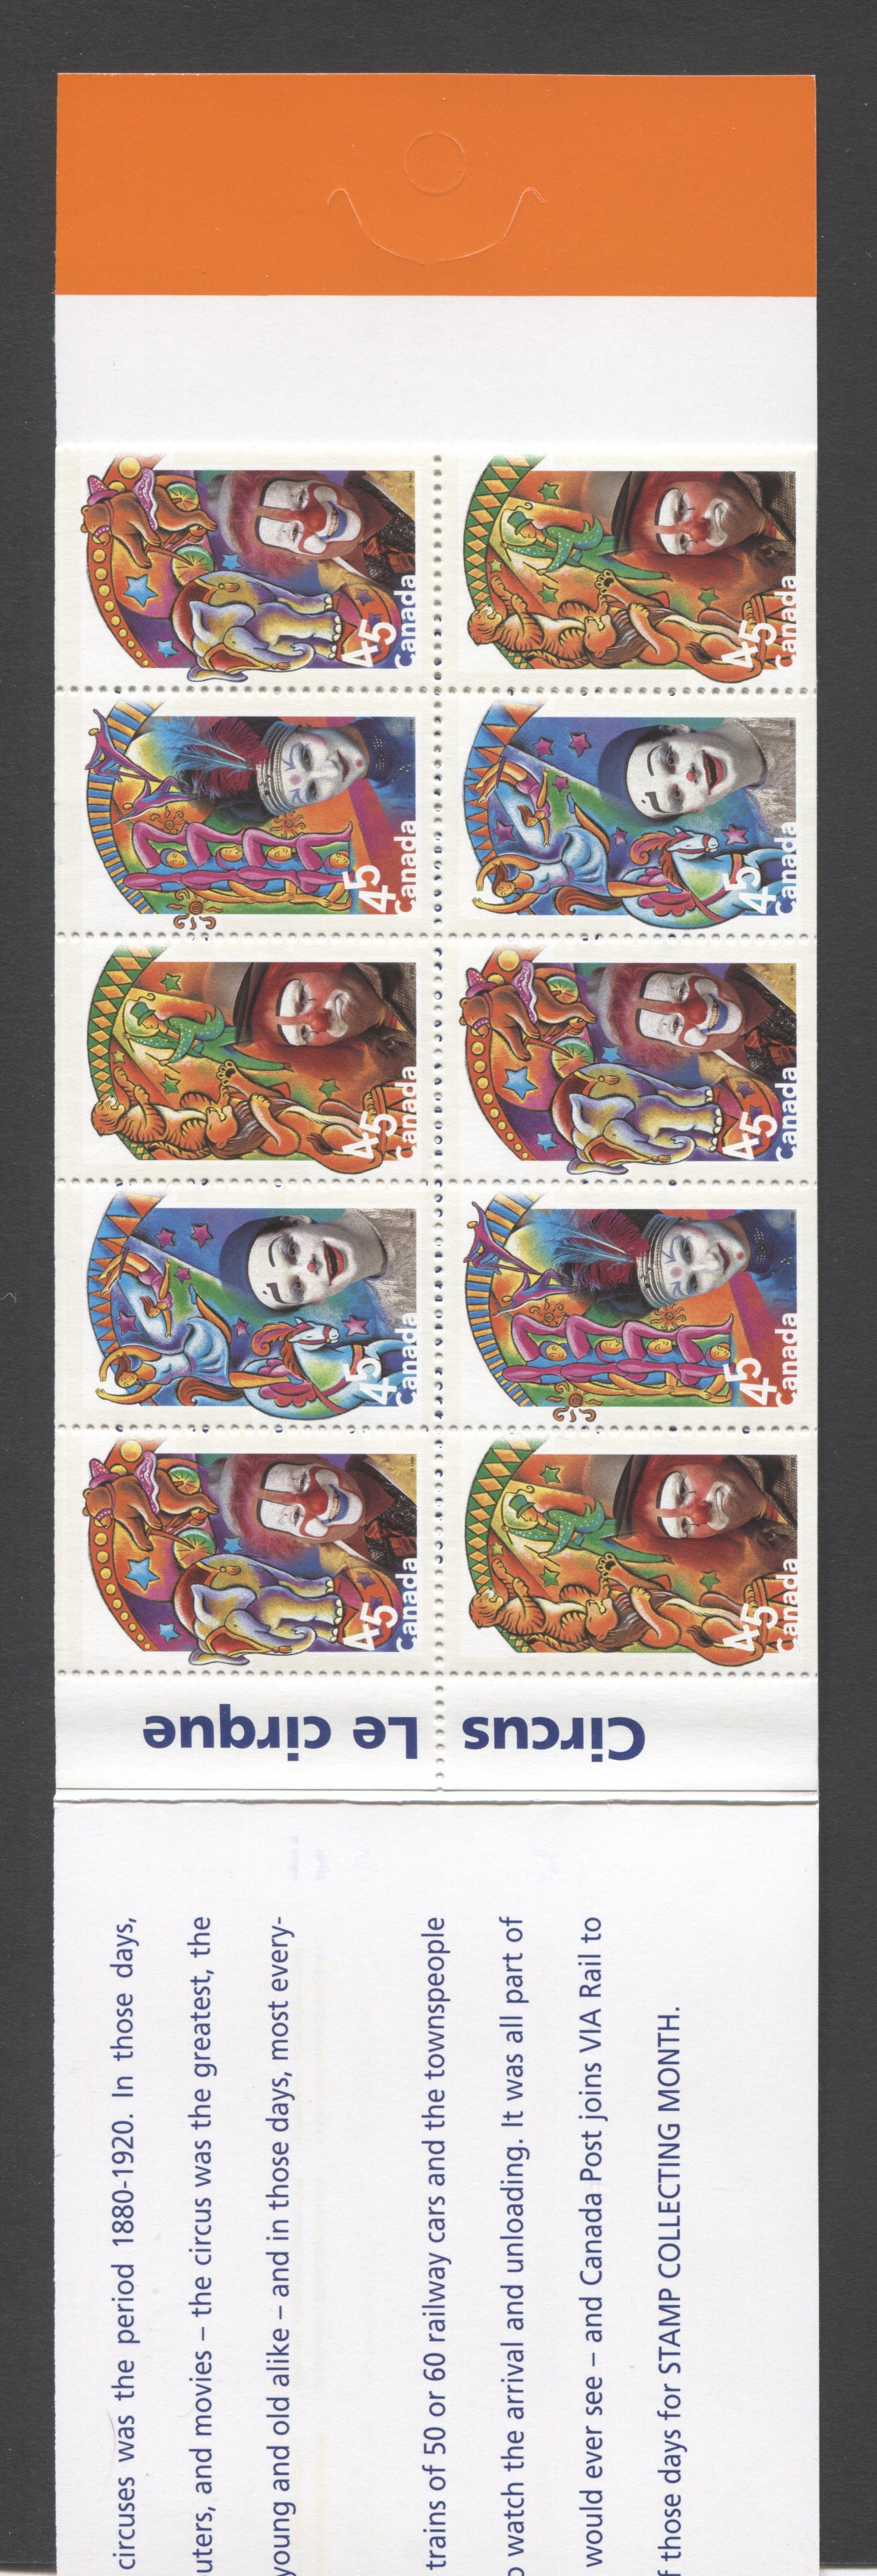 Canada #BK210a-b 1998 The Circus Issue, Complete $5.40 Booklet, Tullis Russell Coatings Paper, Dead Paper, 4 mm GT-4 Tagging